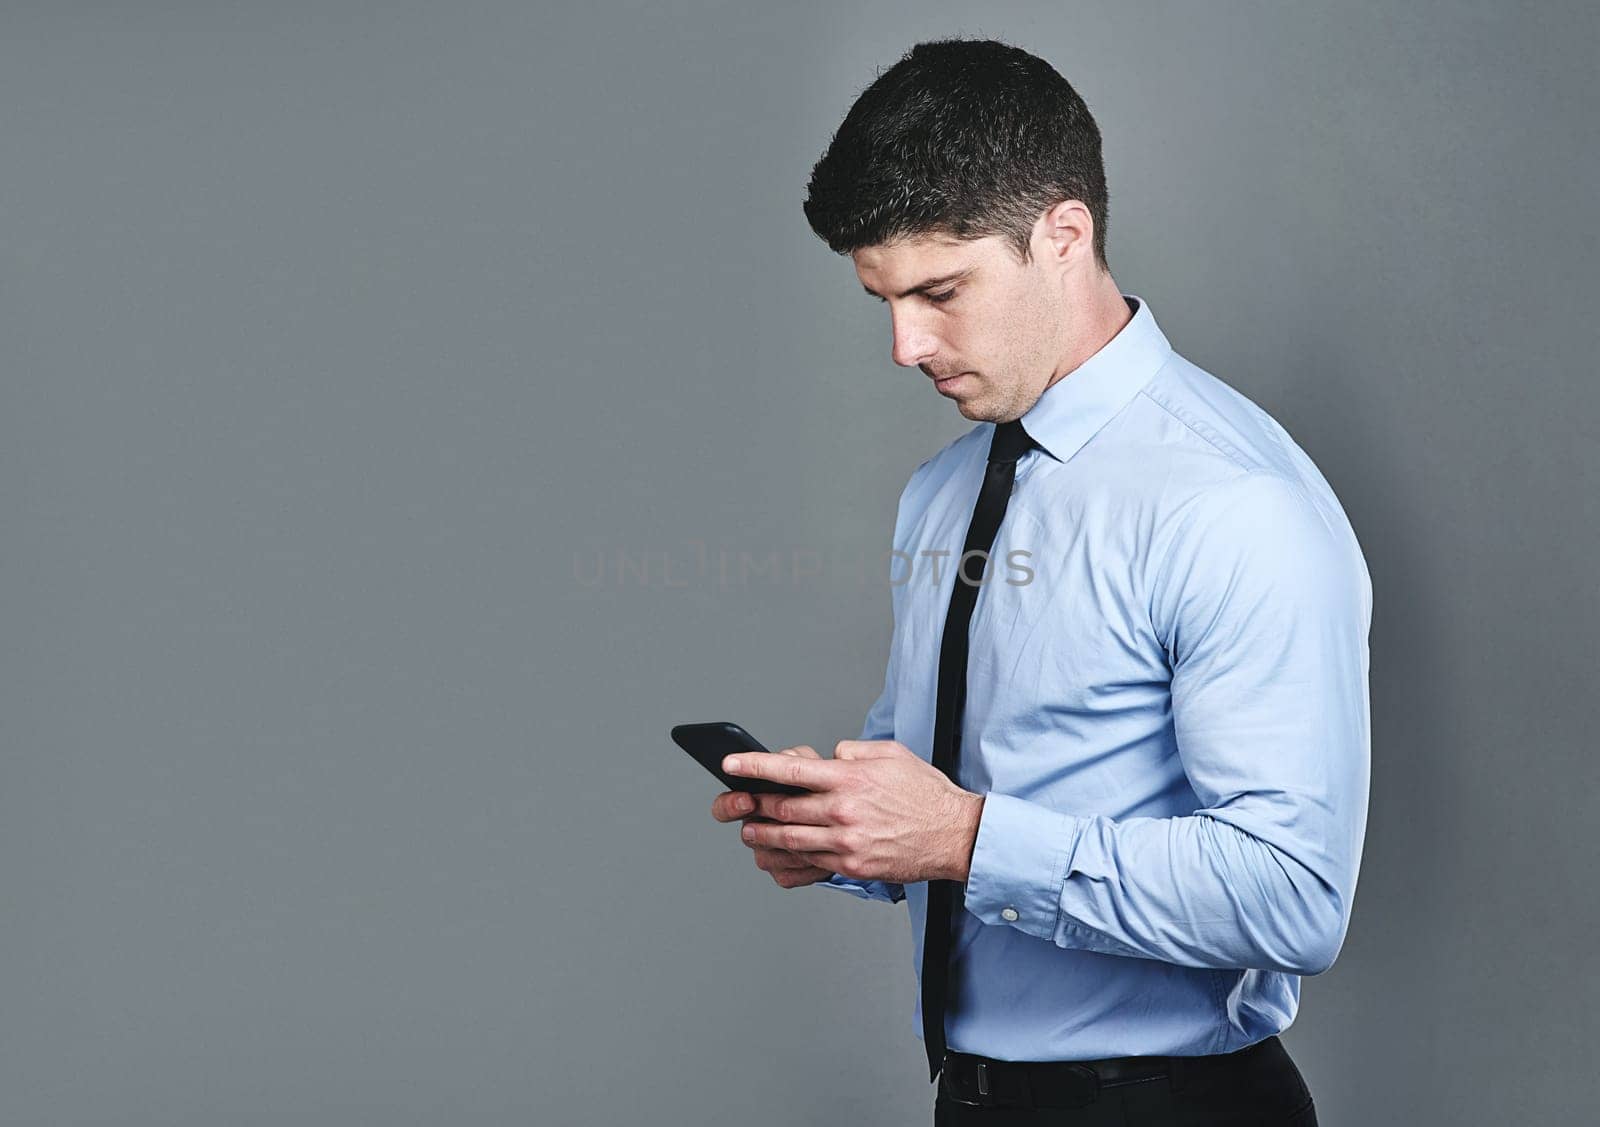 Its essential to maintain communication with clients. Studio shot of a young businessman texting on a cellphone against a grey background